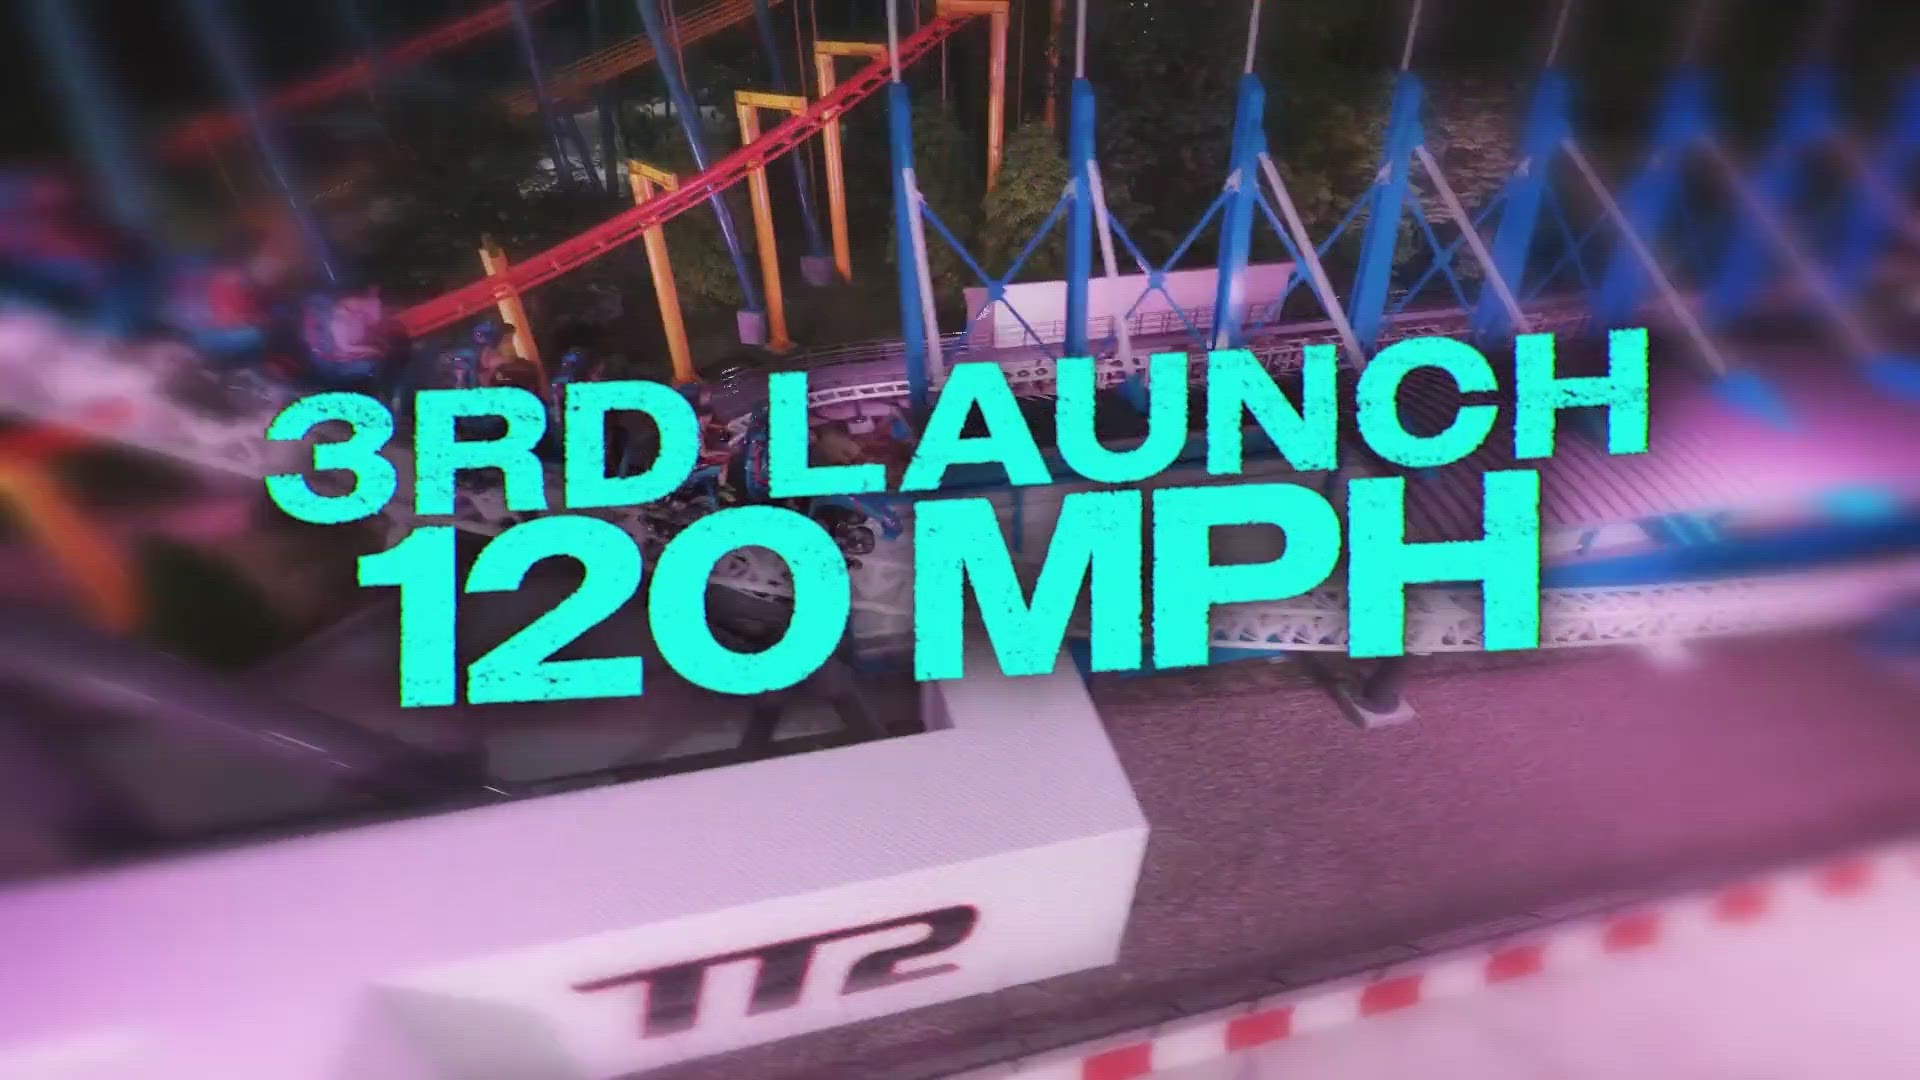 Cedar Point unleashes details for Top Thrill 2 roller coaster coming in